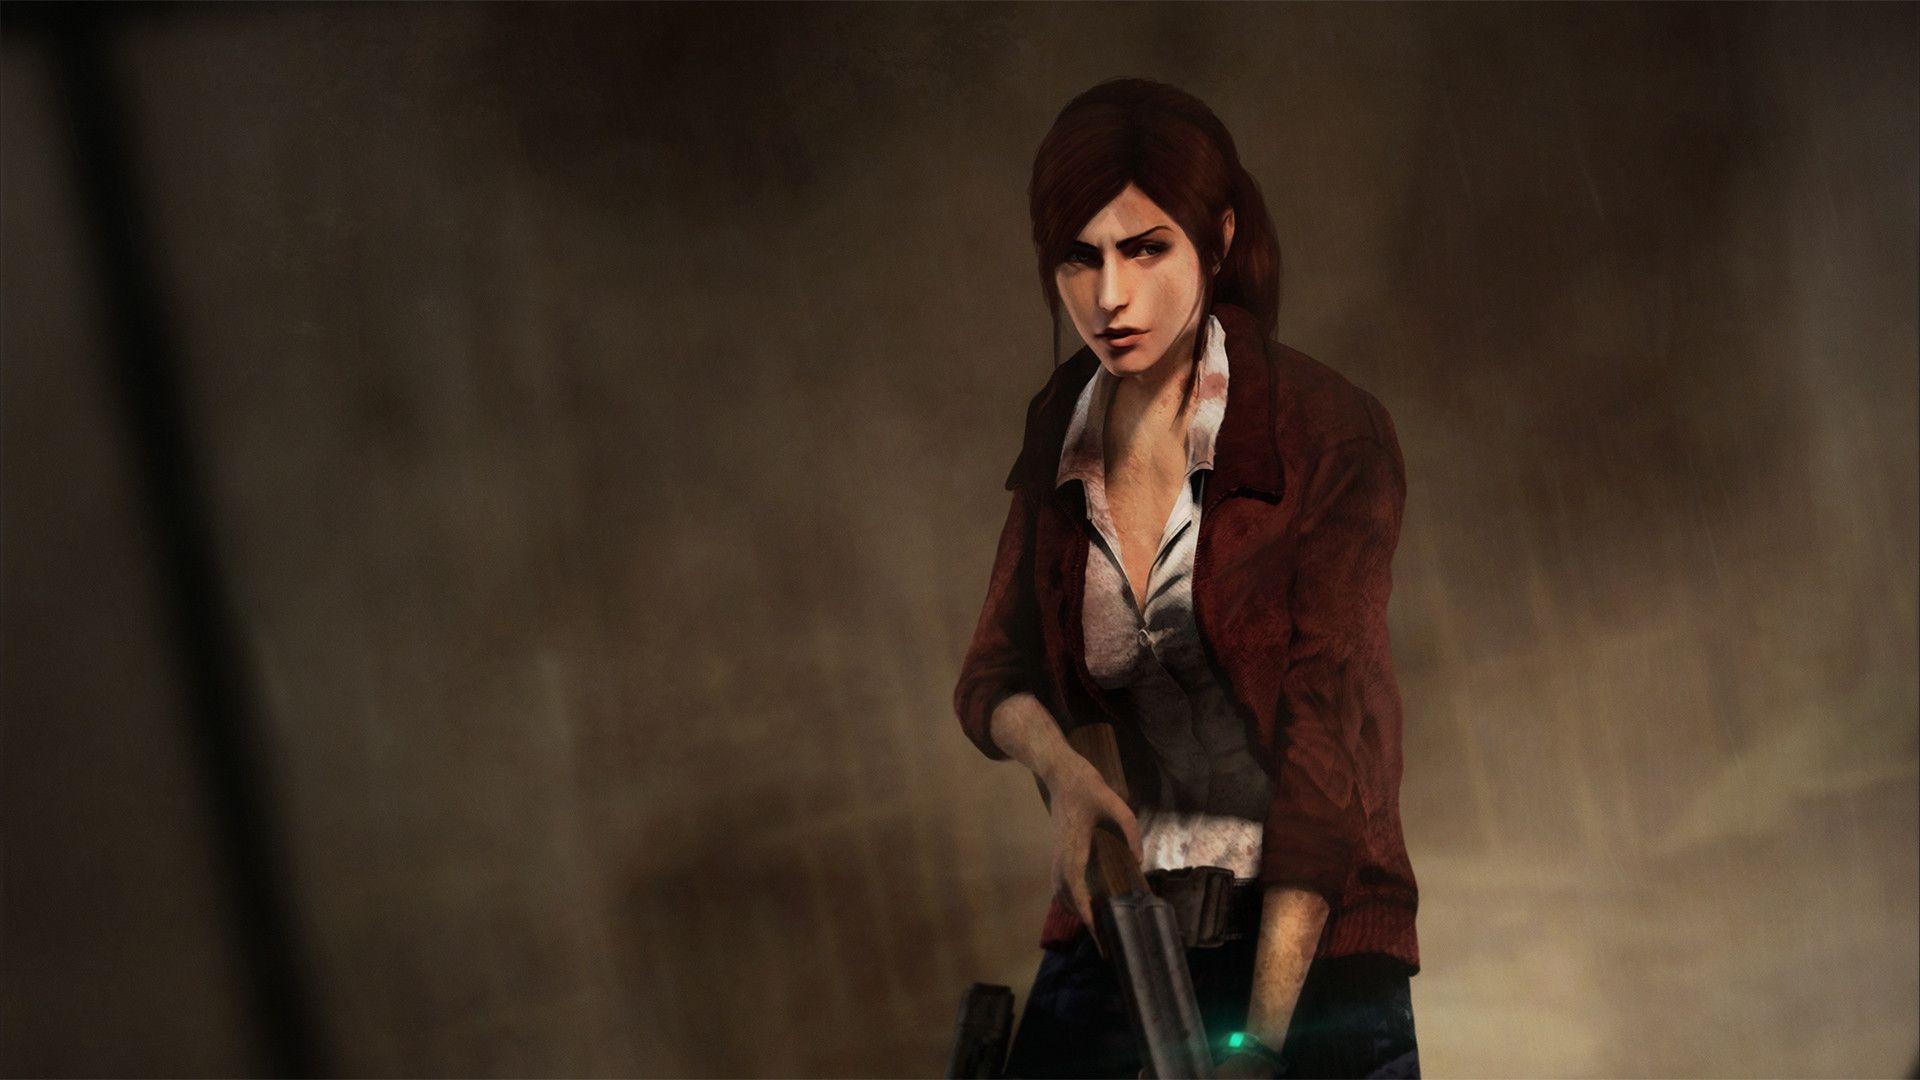 Wallpaper ID 314445  Video Game Resident Evil 2 2019 Phone Wallpaper Claire  Redfield 1440x3040 free download